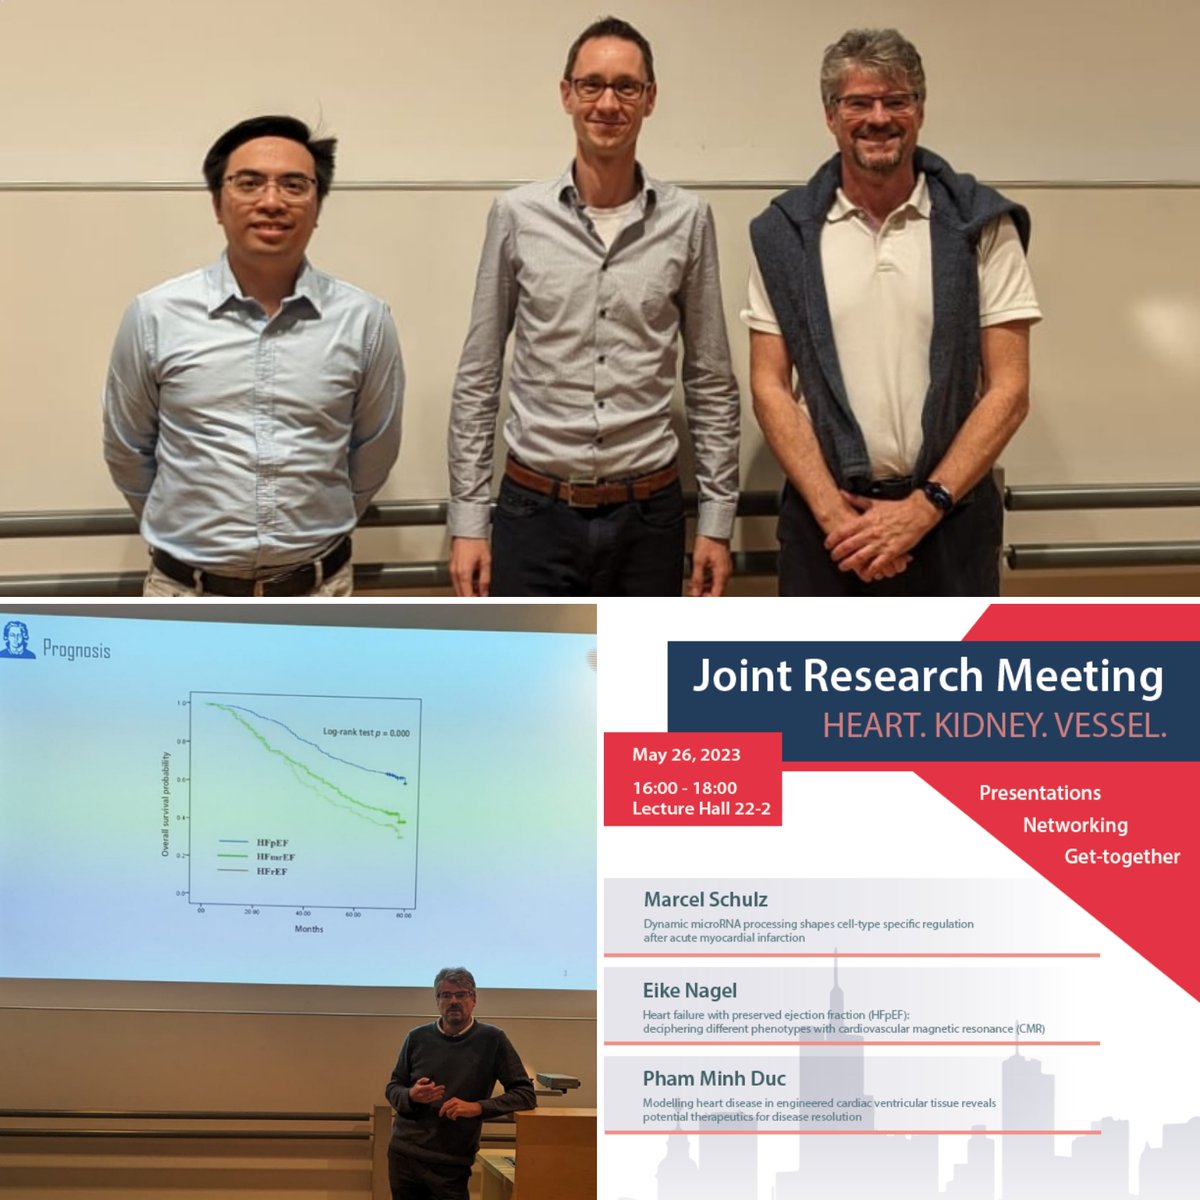 🎙️What a great way to end the week! At the #JointResearchMeeting we again got great insights into cardiovascular research at the @goetheuni in Frankfurt. @IVS_FFM @BrandesLab @DimmelerLab @dzhk_germany @TheMarcelSchulz